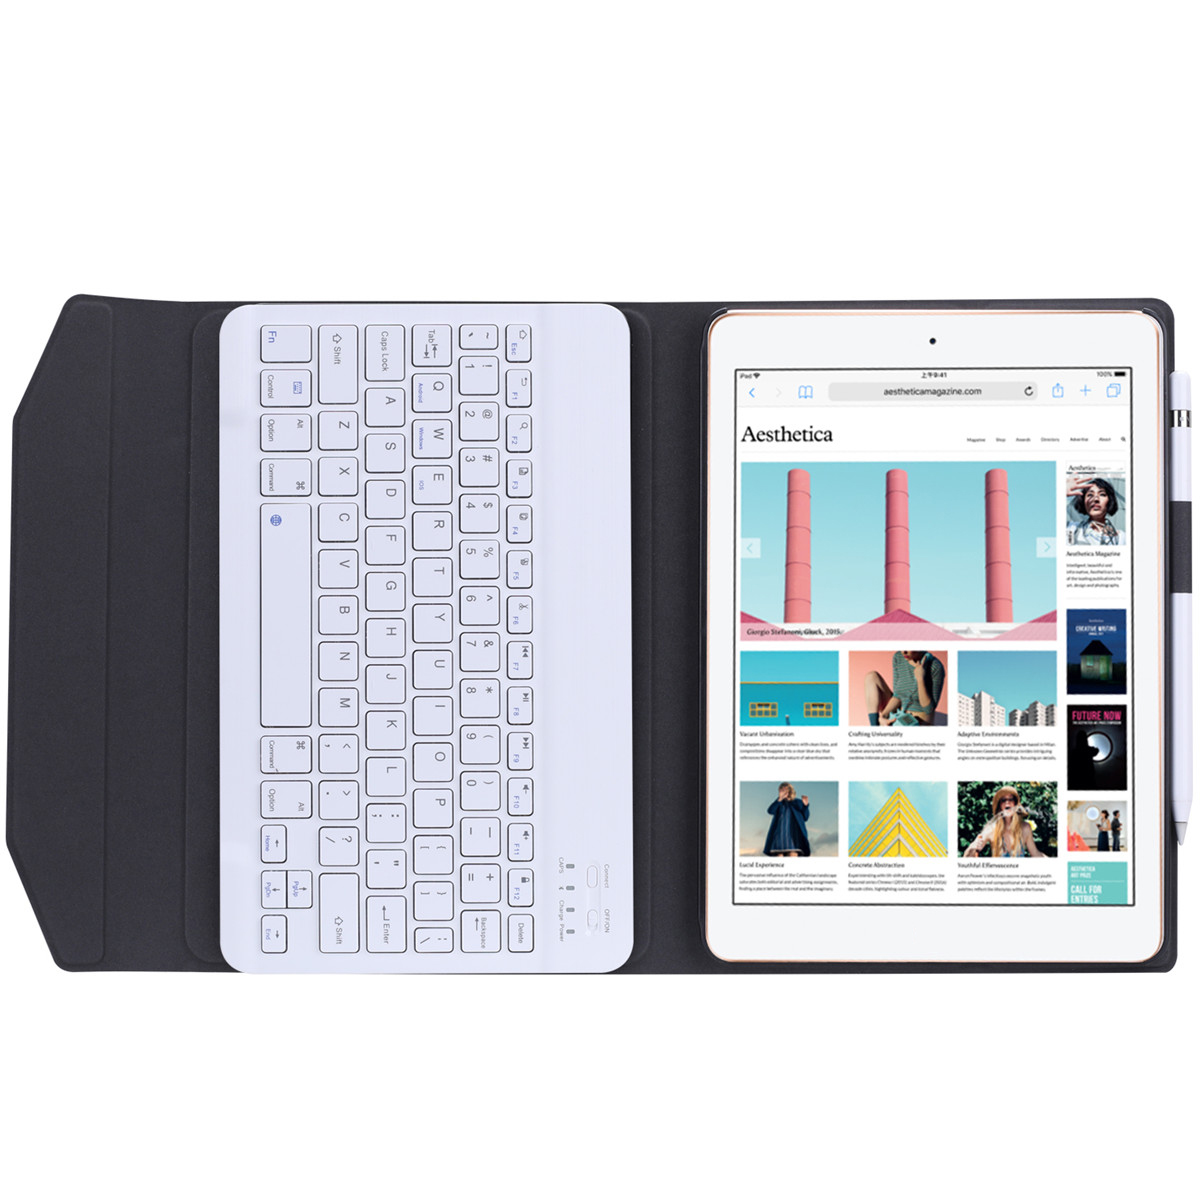 2-in-1-Wireless-bluetooth-Keyboard-Wear-Resistant-PU-Leather-Flip-Foldable-Full-Cover-Protective-Cas-1784740-16